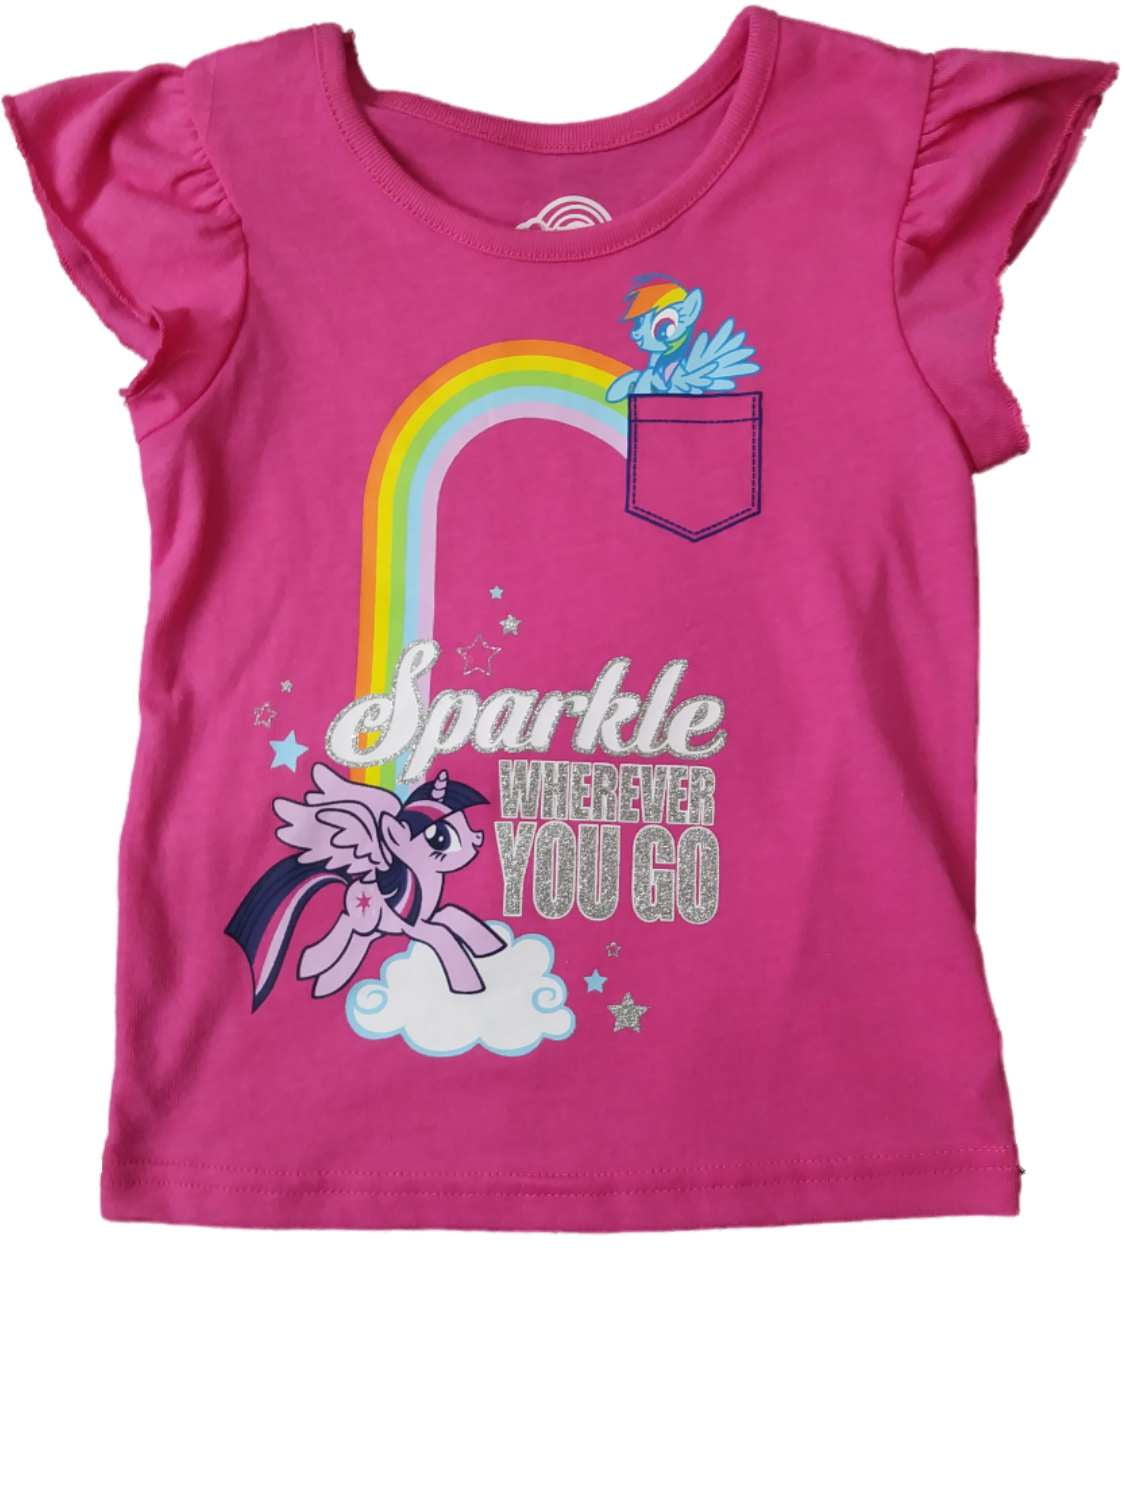 My Little Pony Toddler Girls S/S Blue Character Print Top Size 2T 3T 4T 